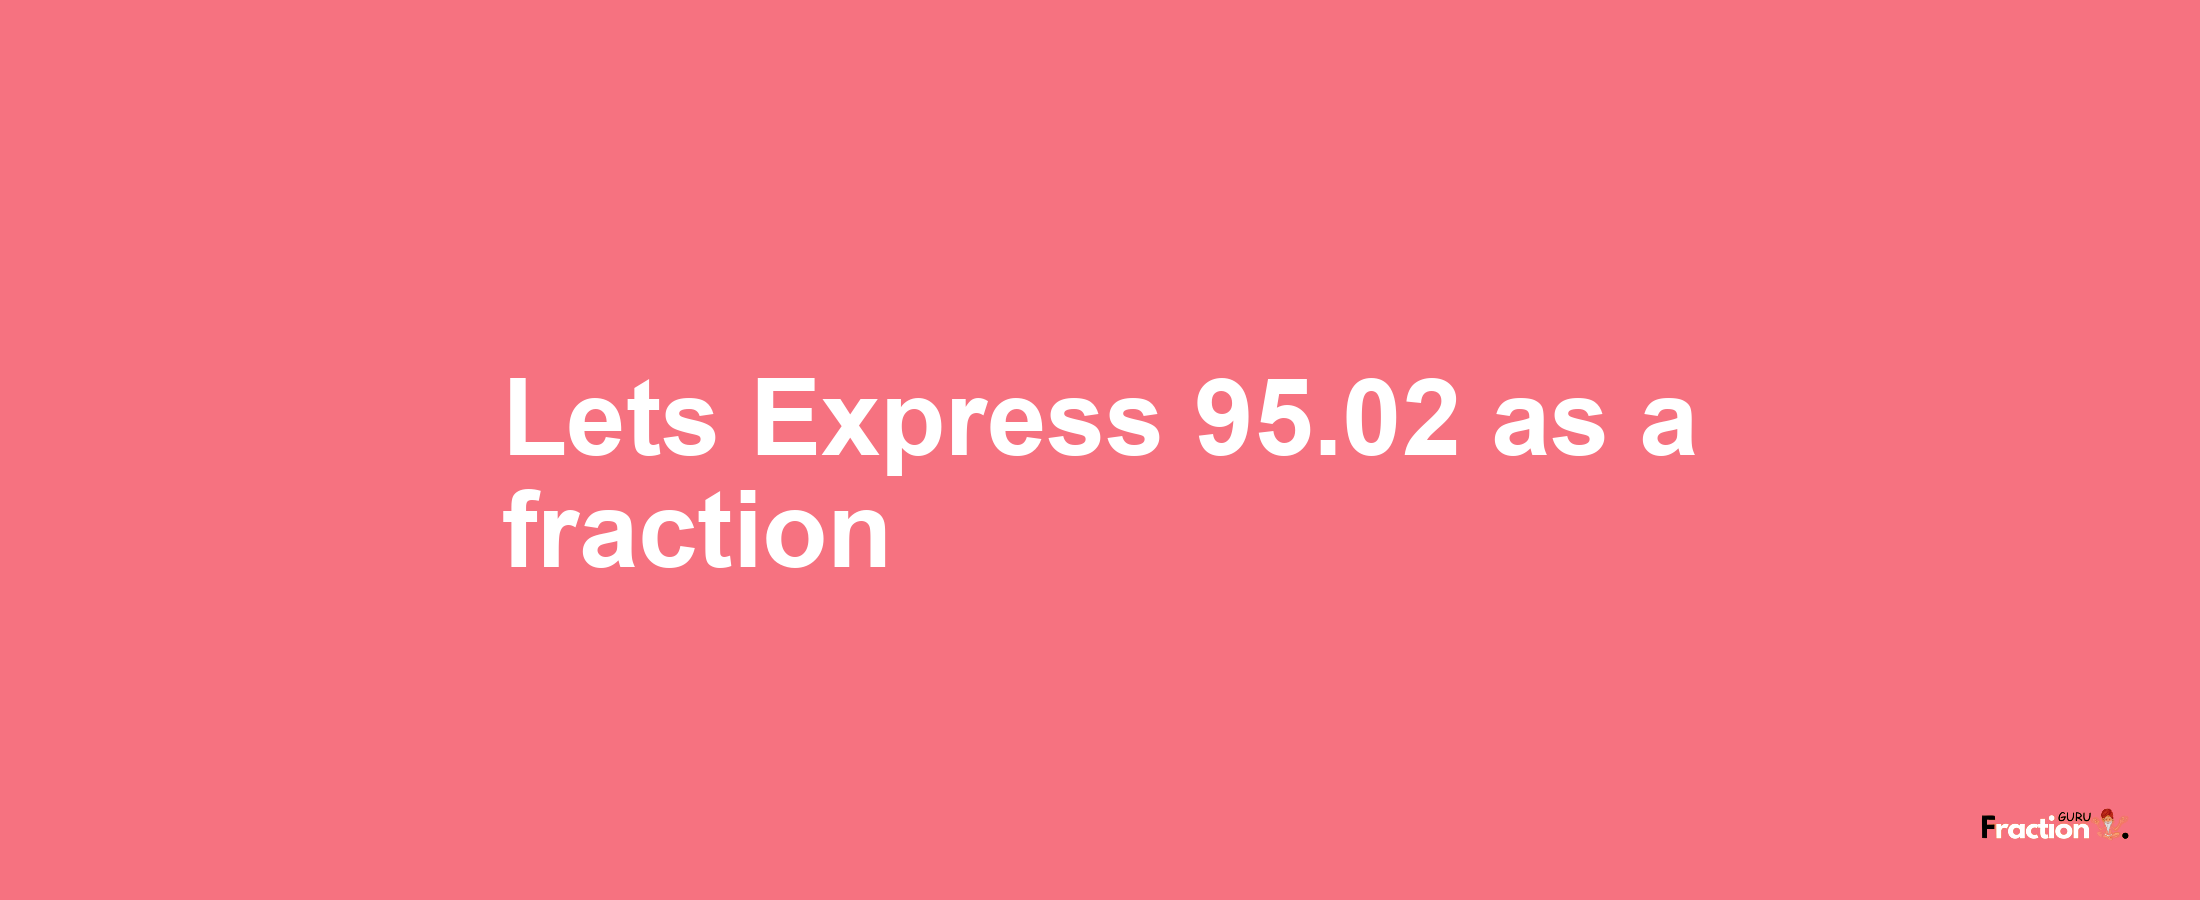 Lets Express 95.02 as afraction